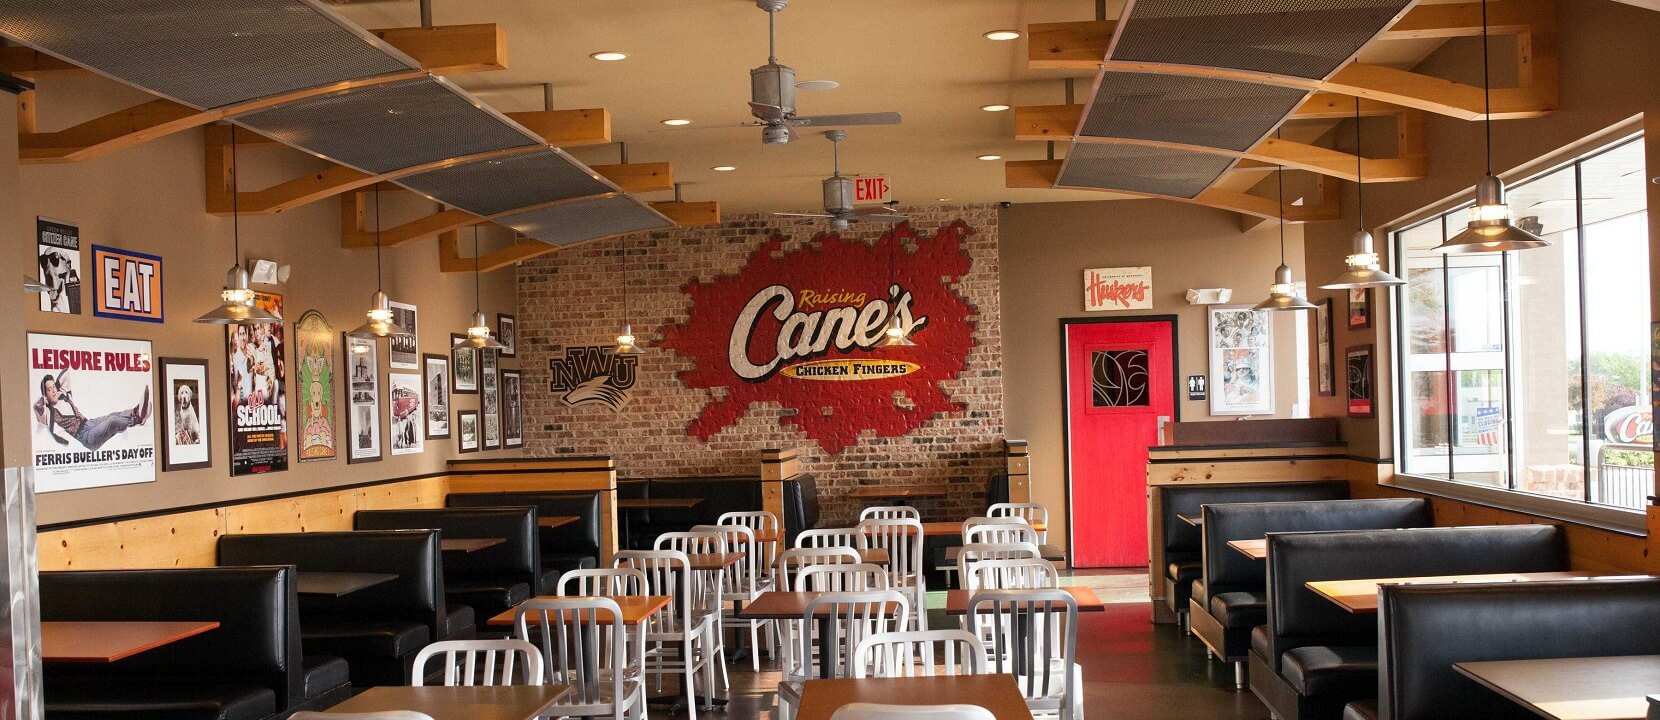 Nationwide Fixture Installations Inc Raising Cane's Chicken Fingers Case Study Millwork Packages New Store Installation Signage Custom Installation Services